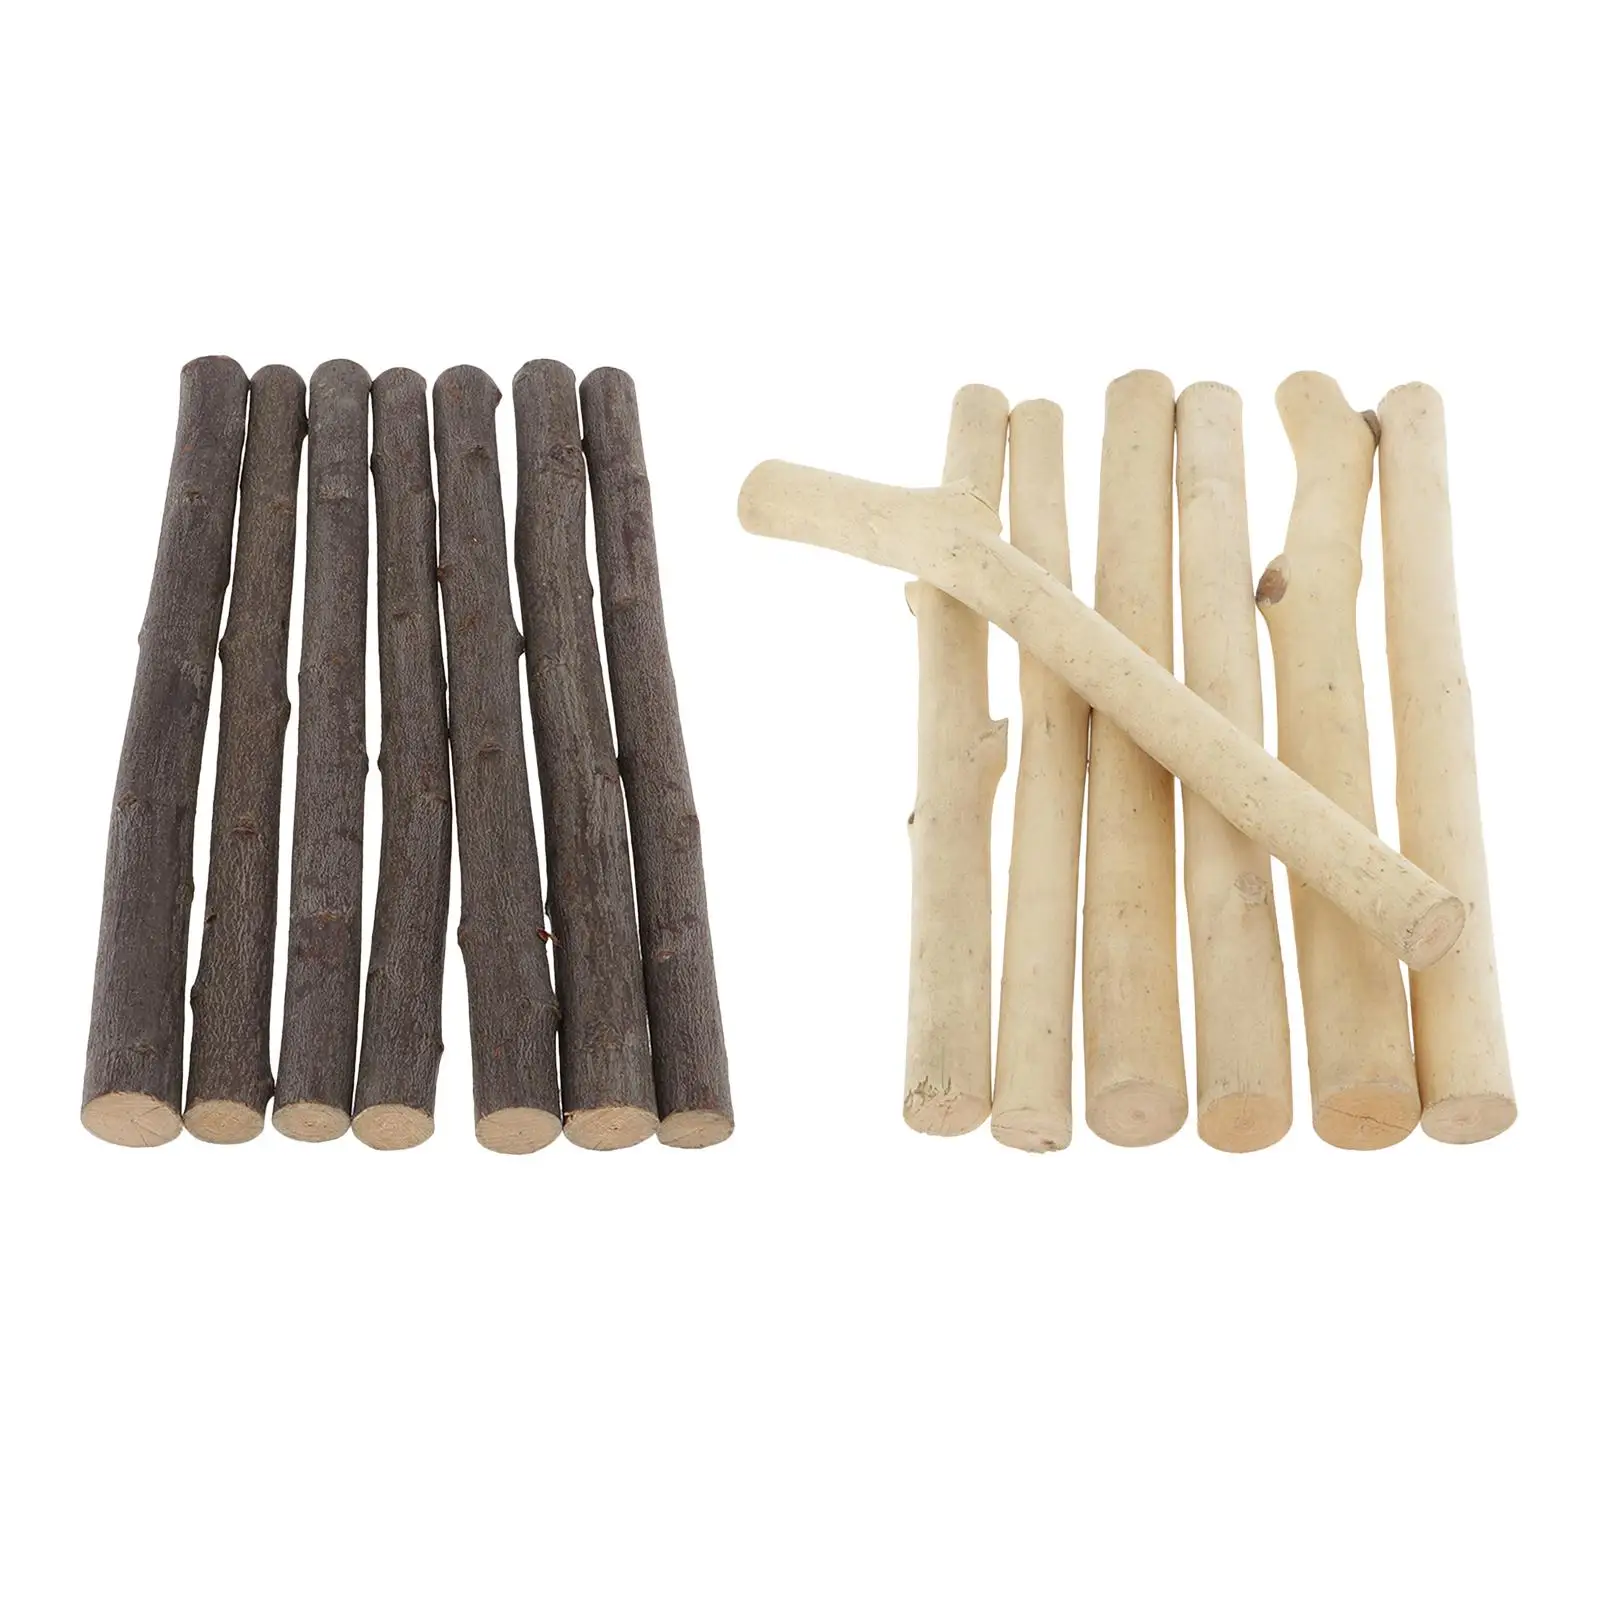 7Pcs Rustic Driftwood Wood Sticks Wooden Twigs Natural Unfinished Craft Branch Logs for Arts Crafts, Photo Props, Embellishments